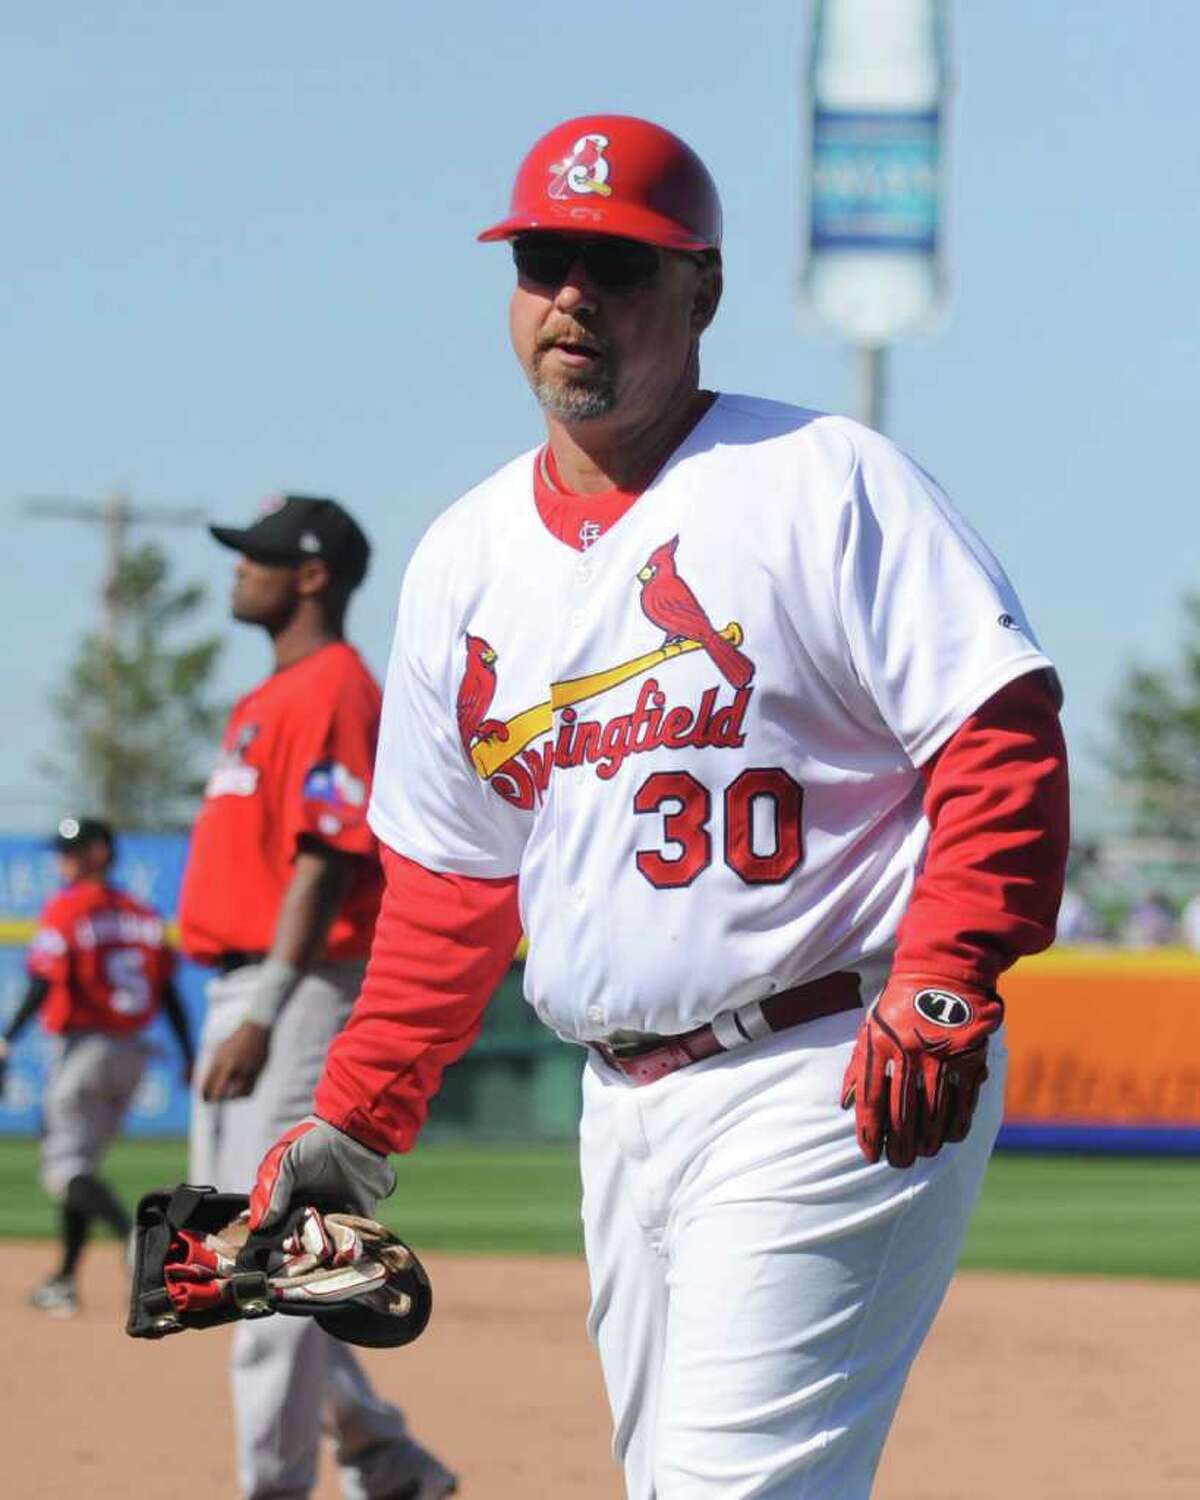 Phillip Wellman of Bulverde has spent 27 years in baseball. This year he is a hitting instructor for the St. Louis Cardinals’ Double-A club. See story on P10.